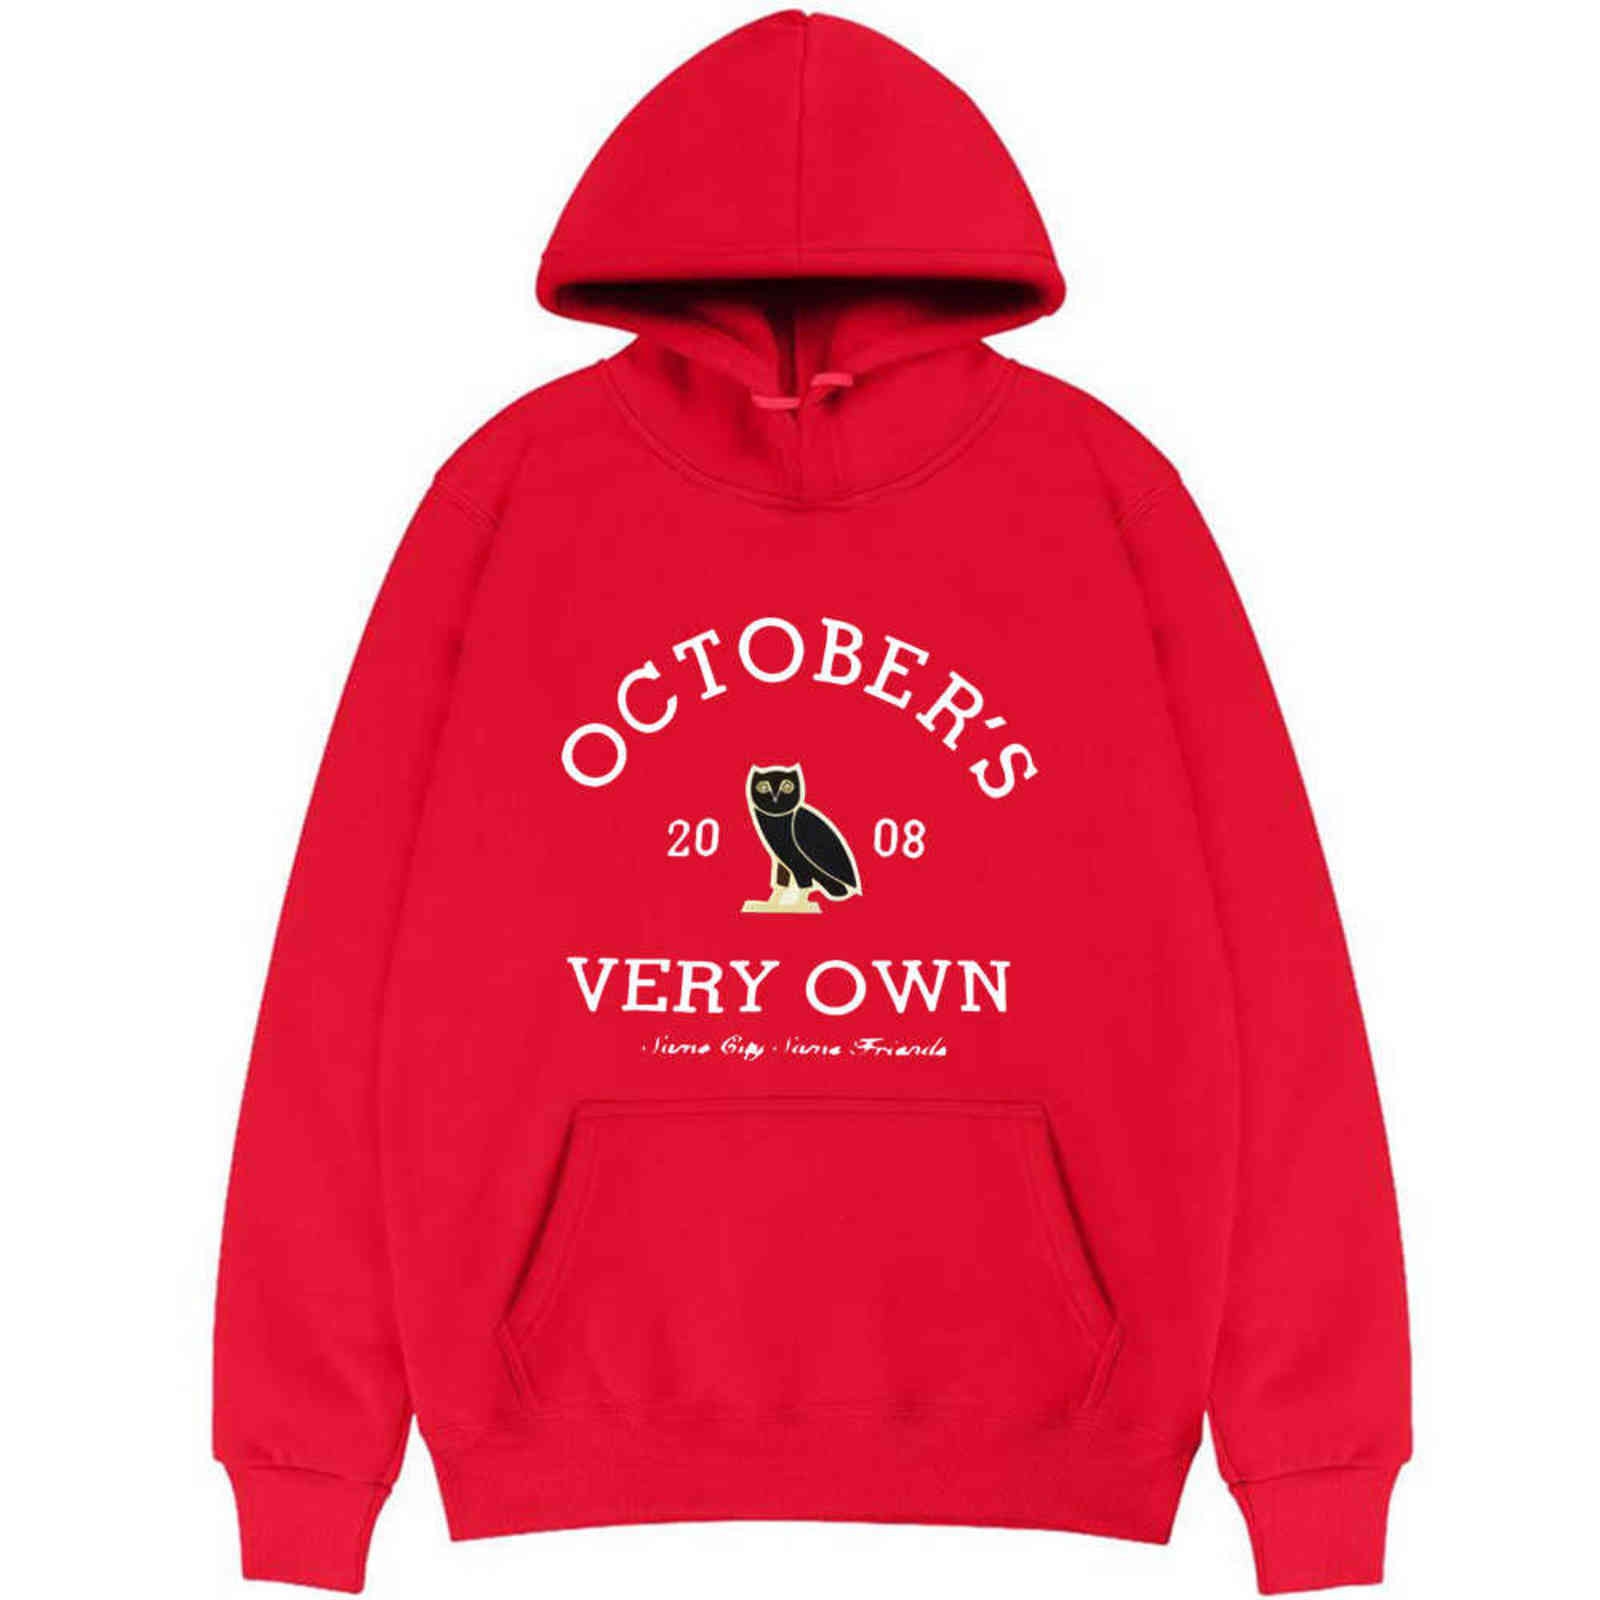 

Hot Selling October's 2021 Very Own Letter Tee Owl Print Hoodie Couples Fashion Top Coat Long Sleeve Men Women Harajuku All-match Sweatshirt, Only extra shipping